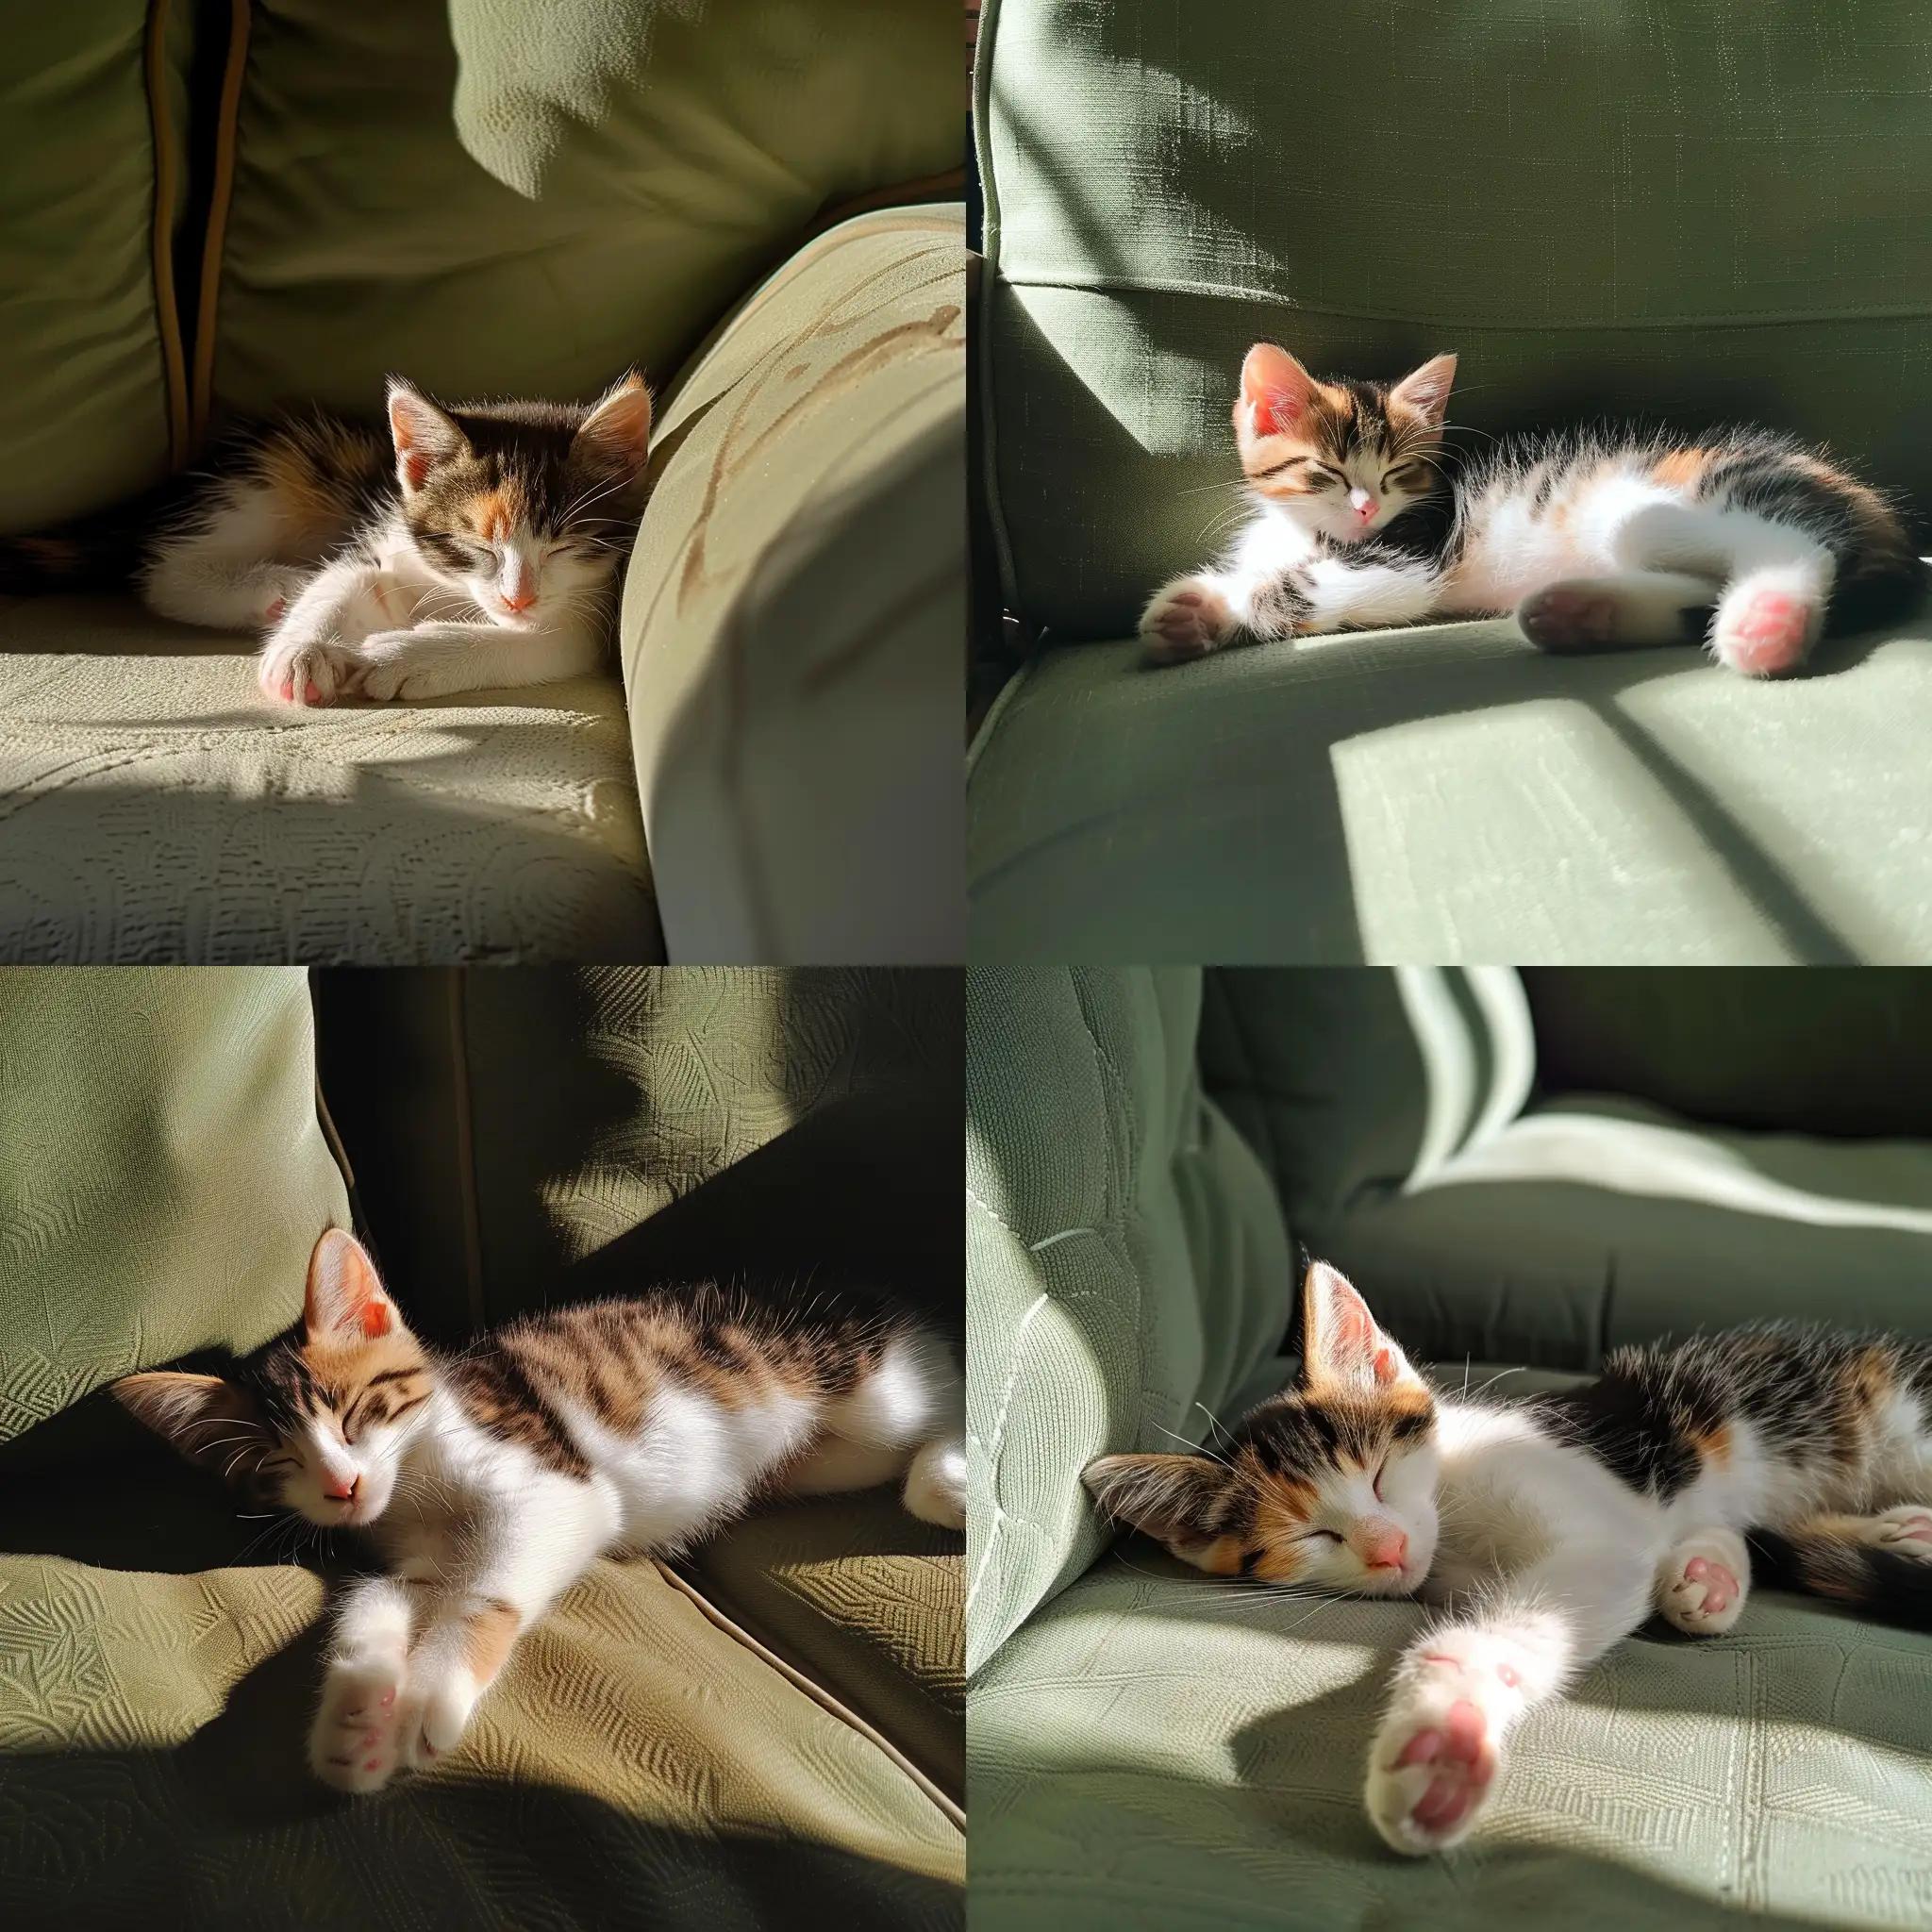 Sleepy calico kitten napping in the sun on a sage green couch. Style: Pixar